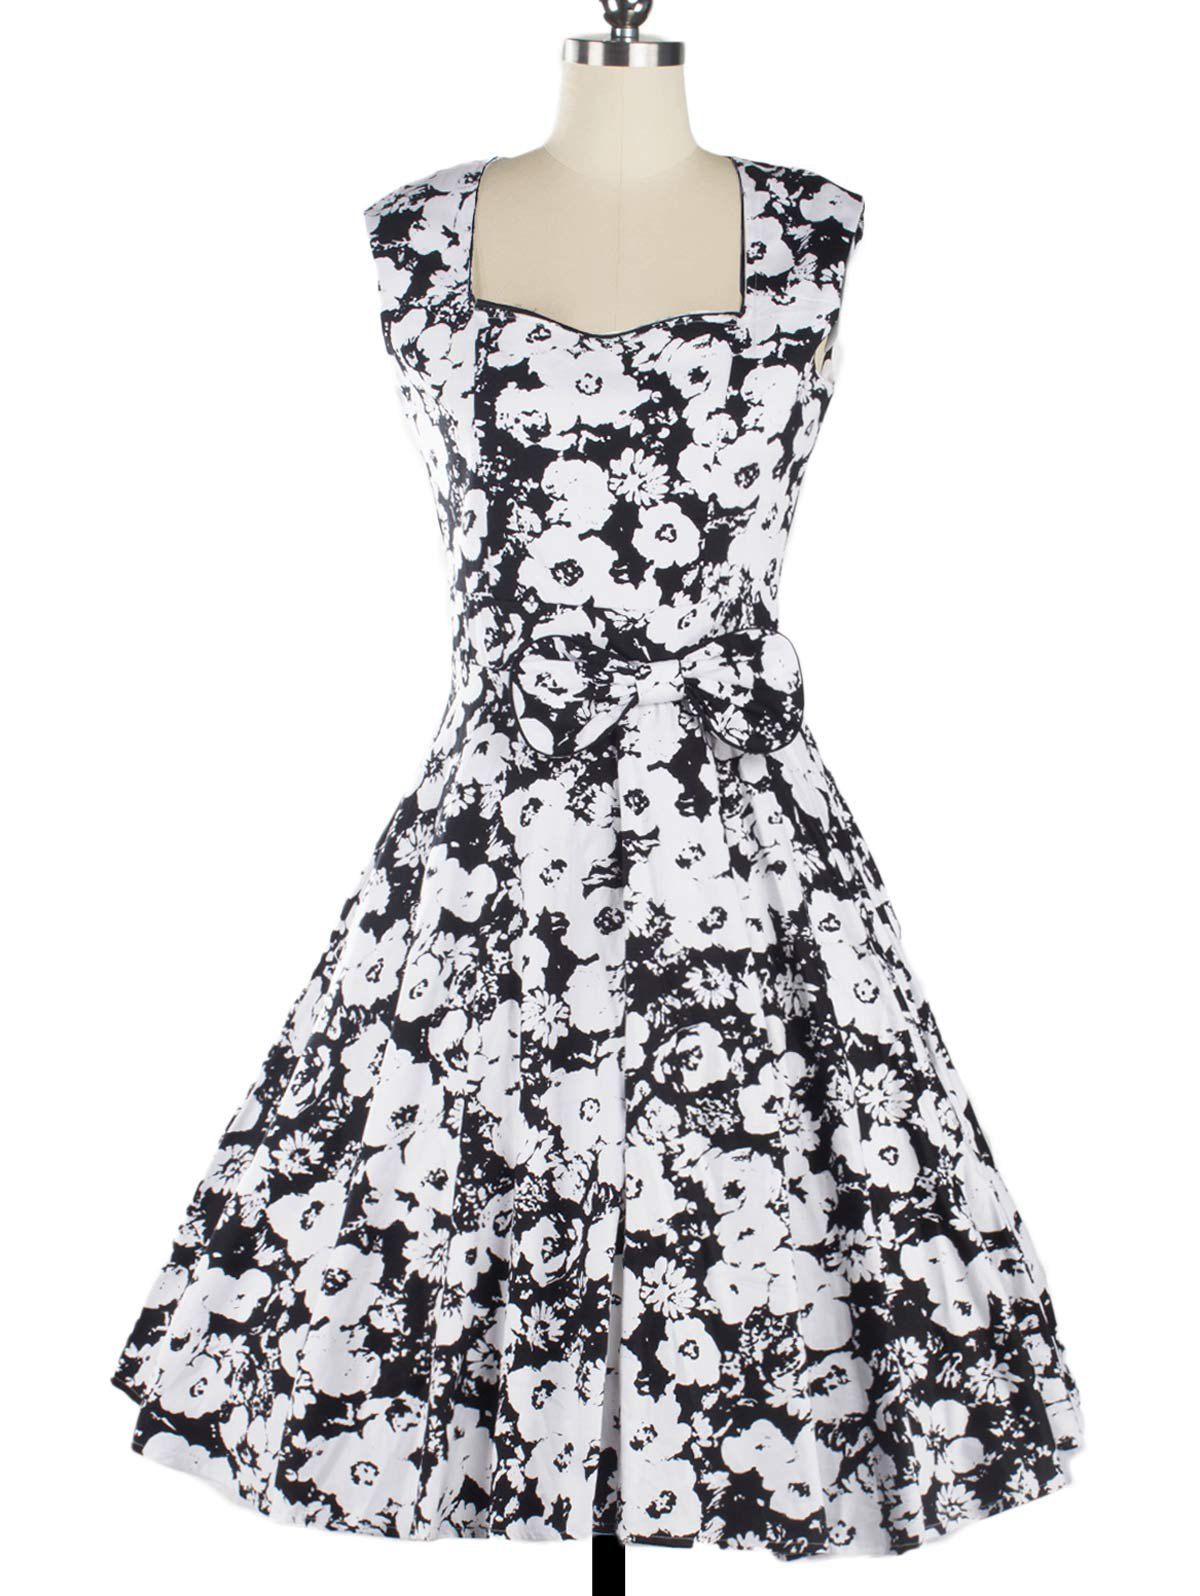 New Vintage Swing Floral Knee Length Fit and Flare Dress  